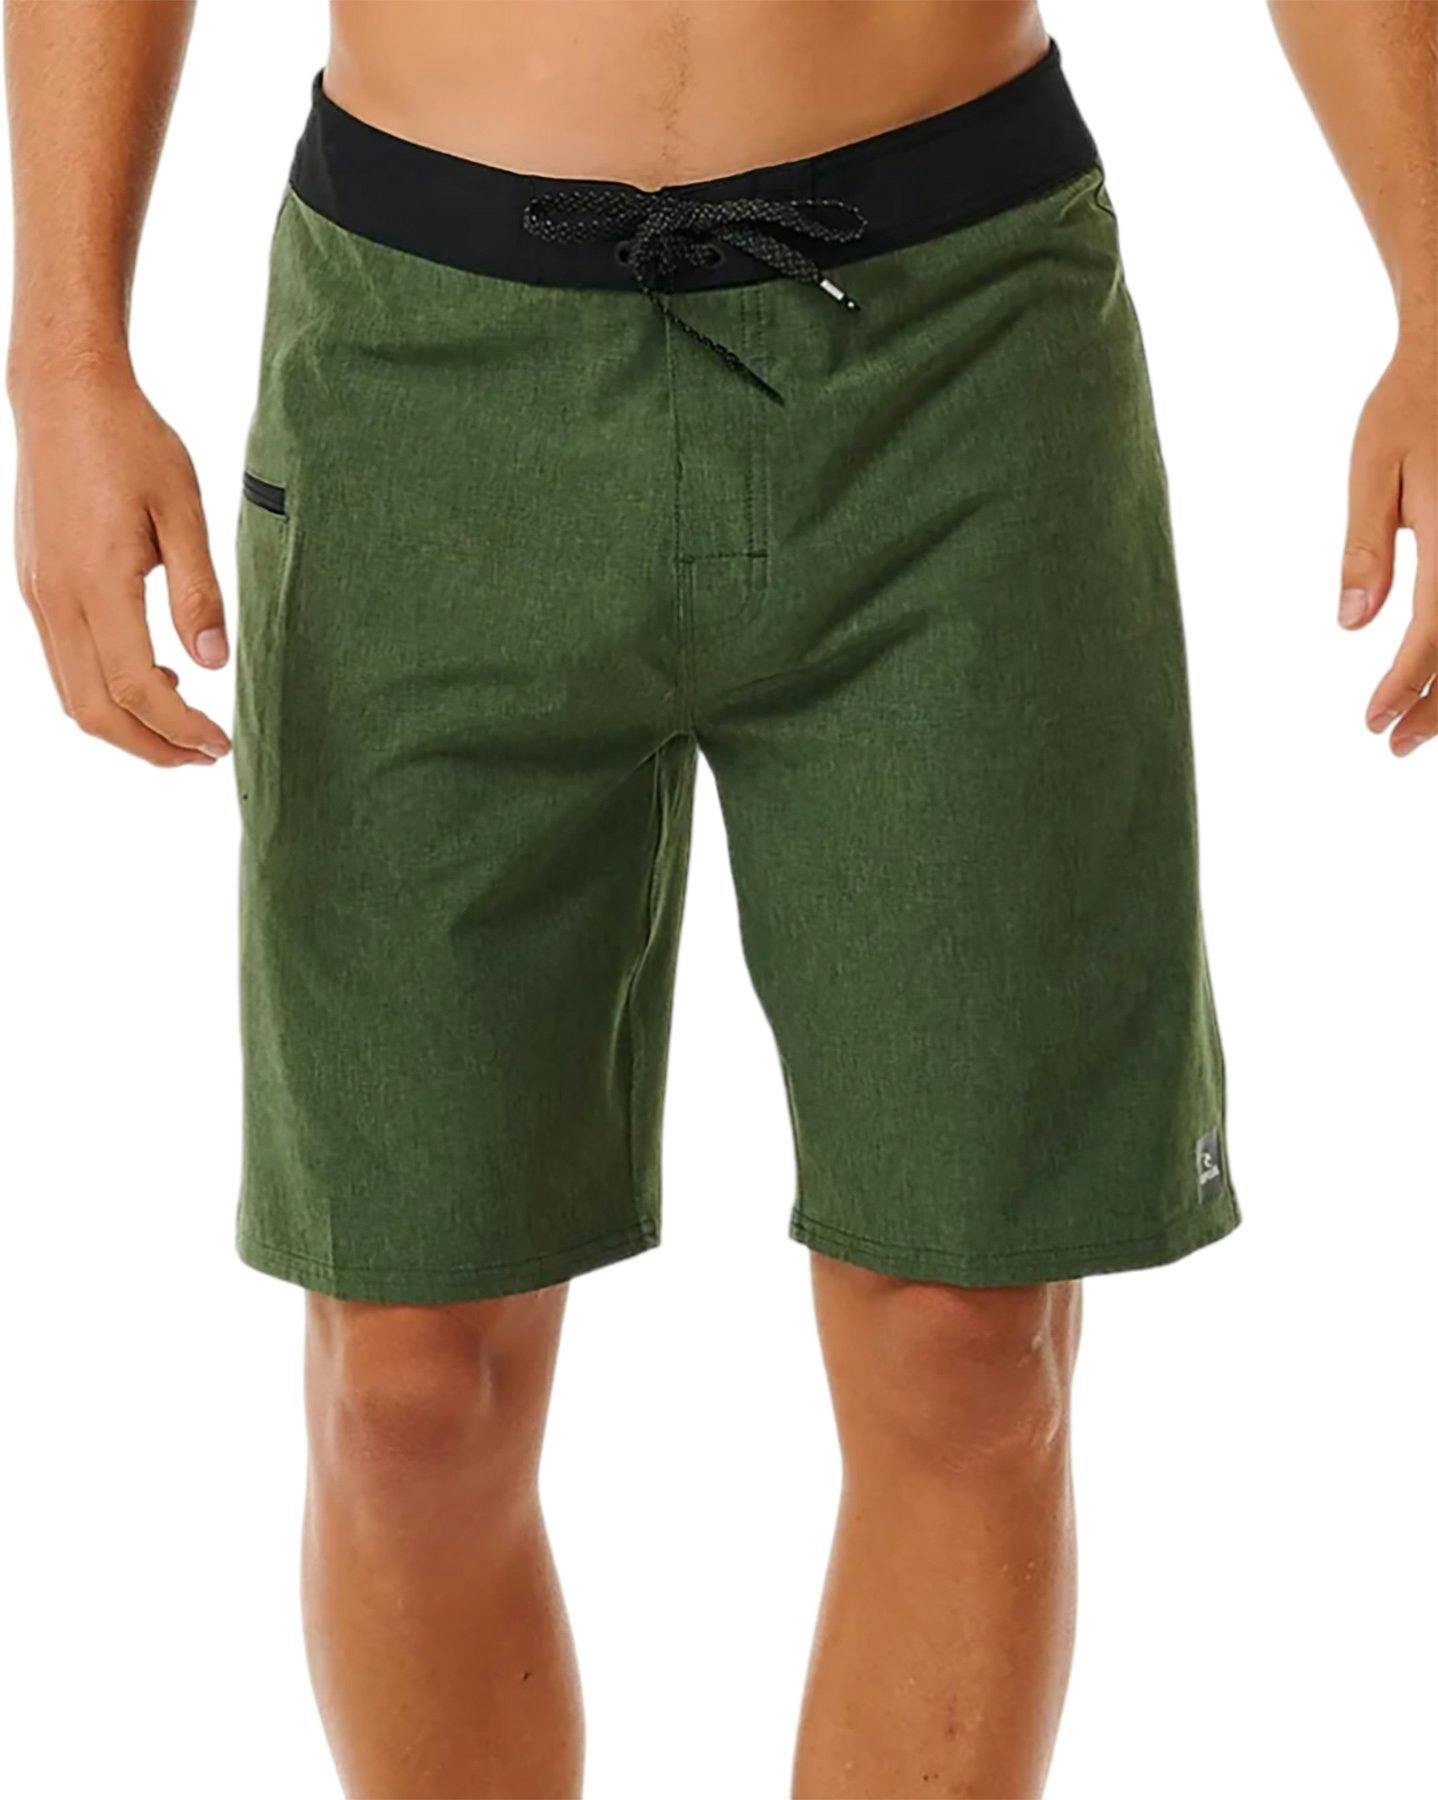 Product image for Mirage Core 20 In Boardshorts - Men's